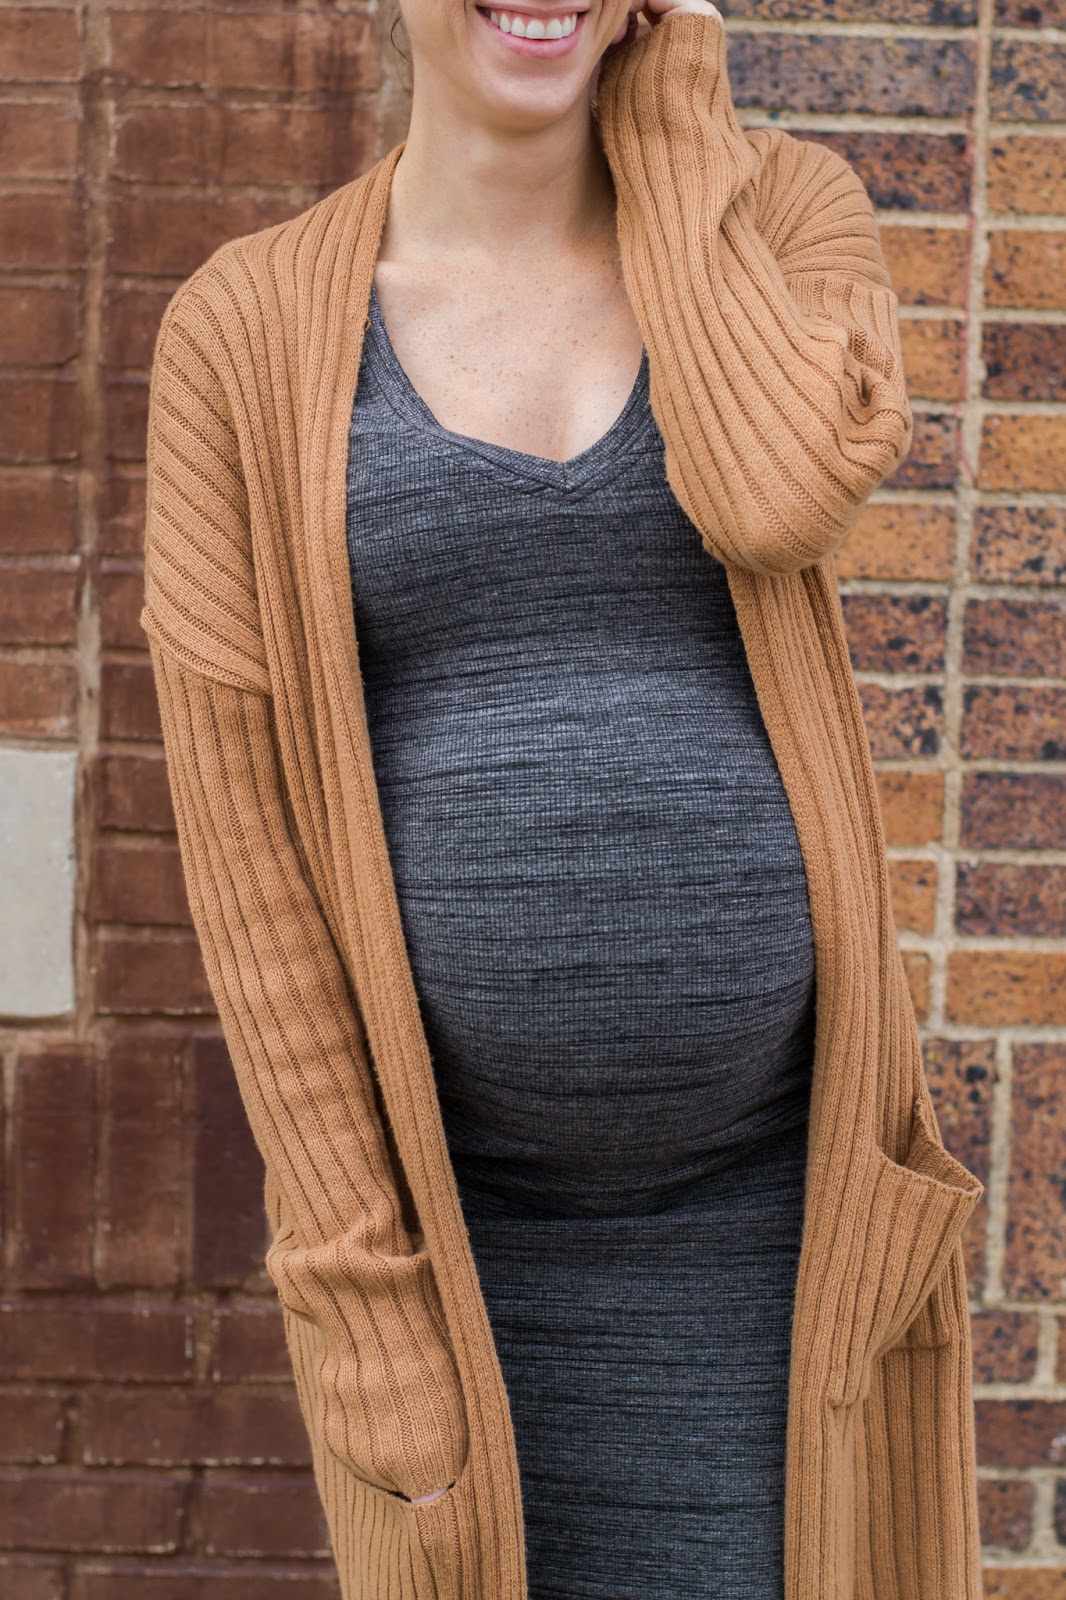 Maternity style in body con dress and oversized cardigan